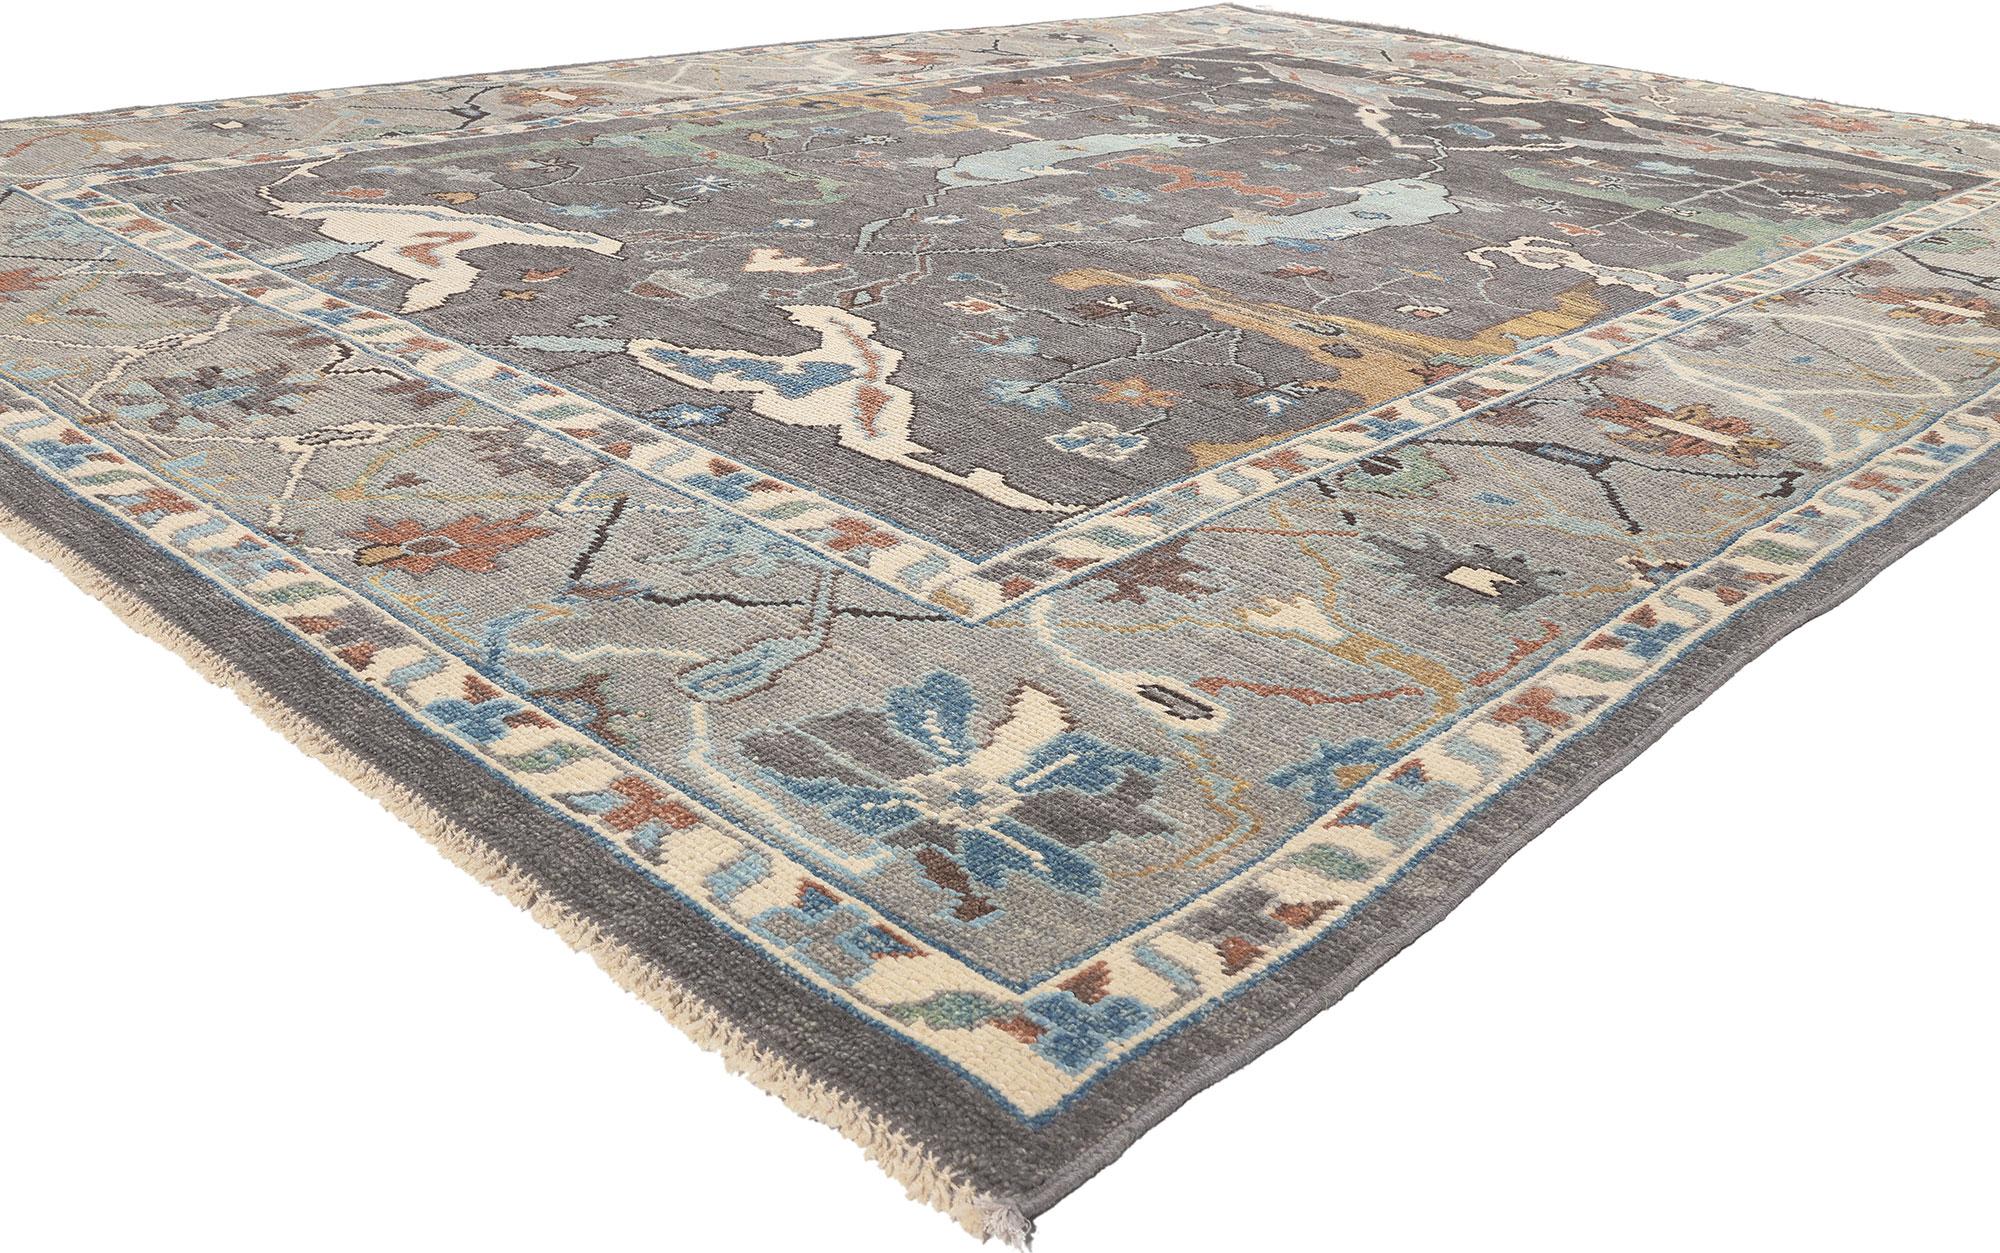 80991 New Modern Oushak Rug with Earth-Tone Colors, 09'00 x 12'05. Emanating timeless style with incredible detail and texture, this modern Oushak rug is the answer to upscale design furnishings, whether generously or gingerly appointed. The